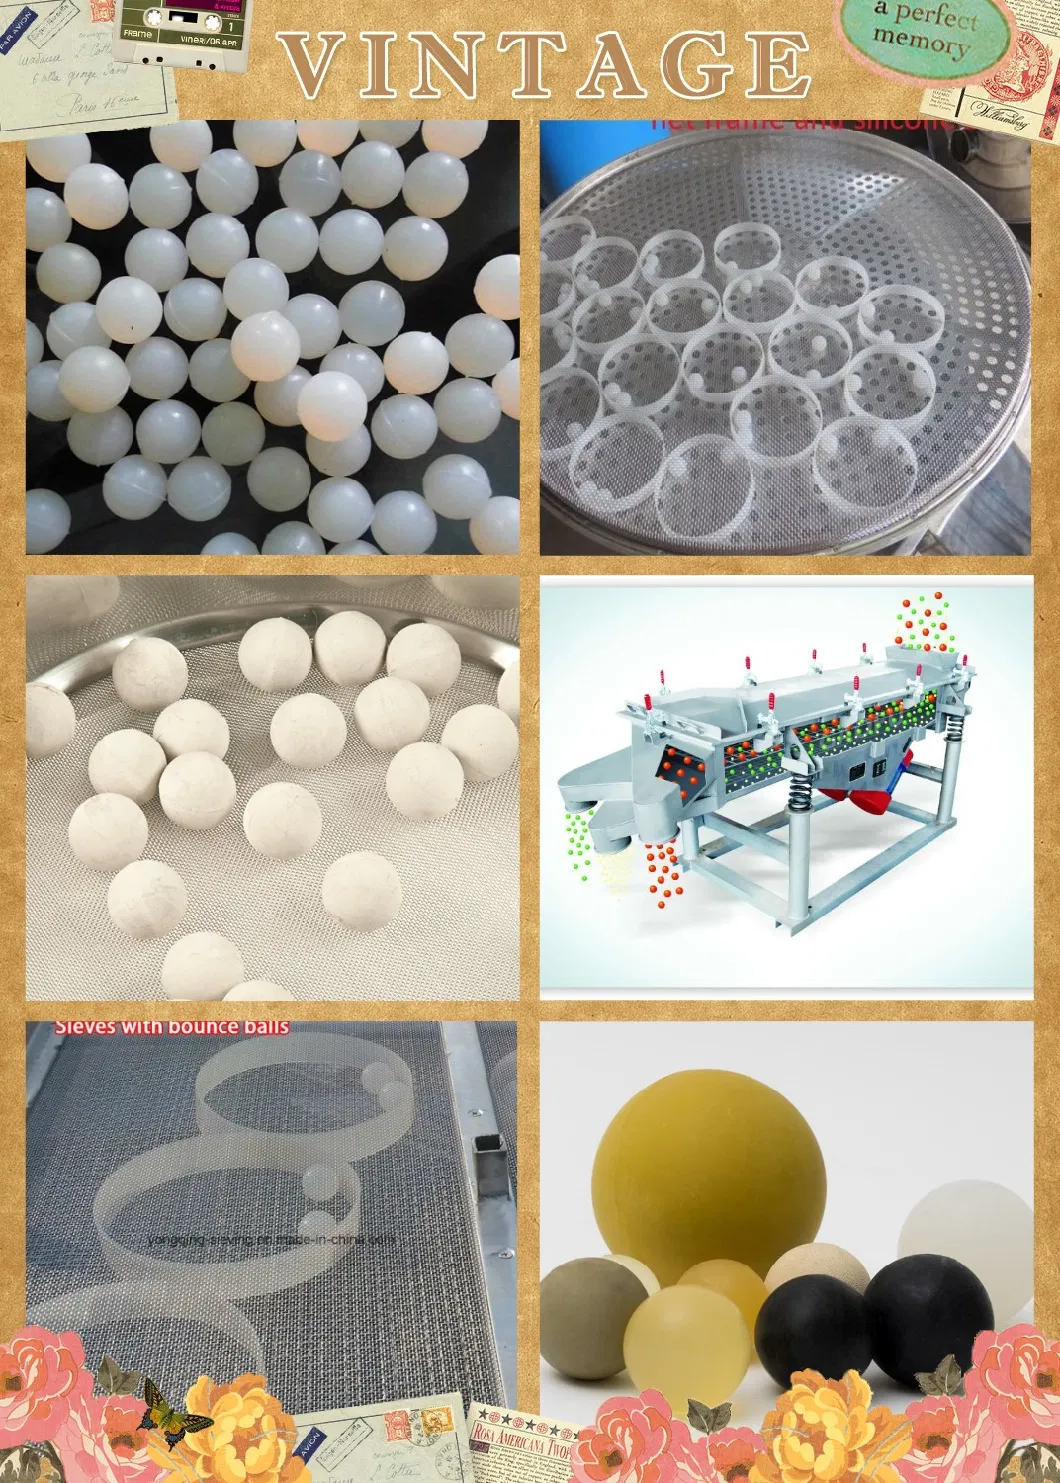 Leading Manufacturer of Custom Silicone Rubber Cleaning Balls in China: Superior Quality and Effective Cleaning Solutions